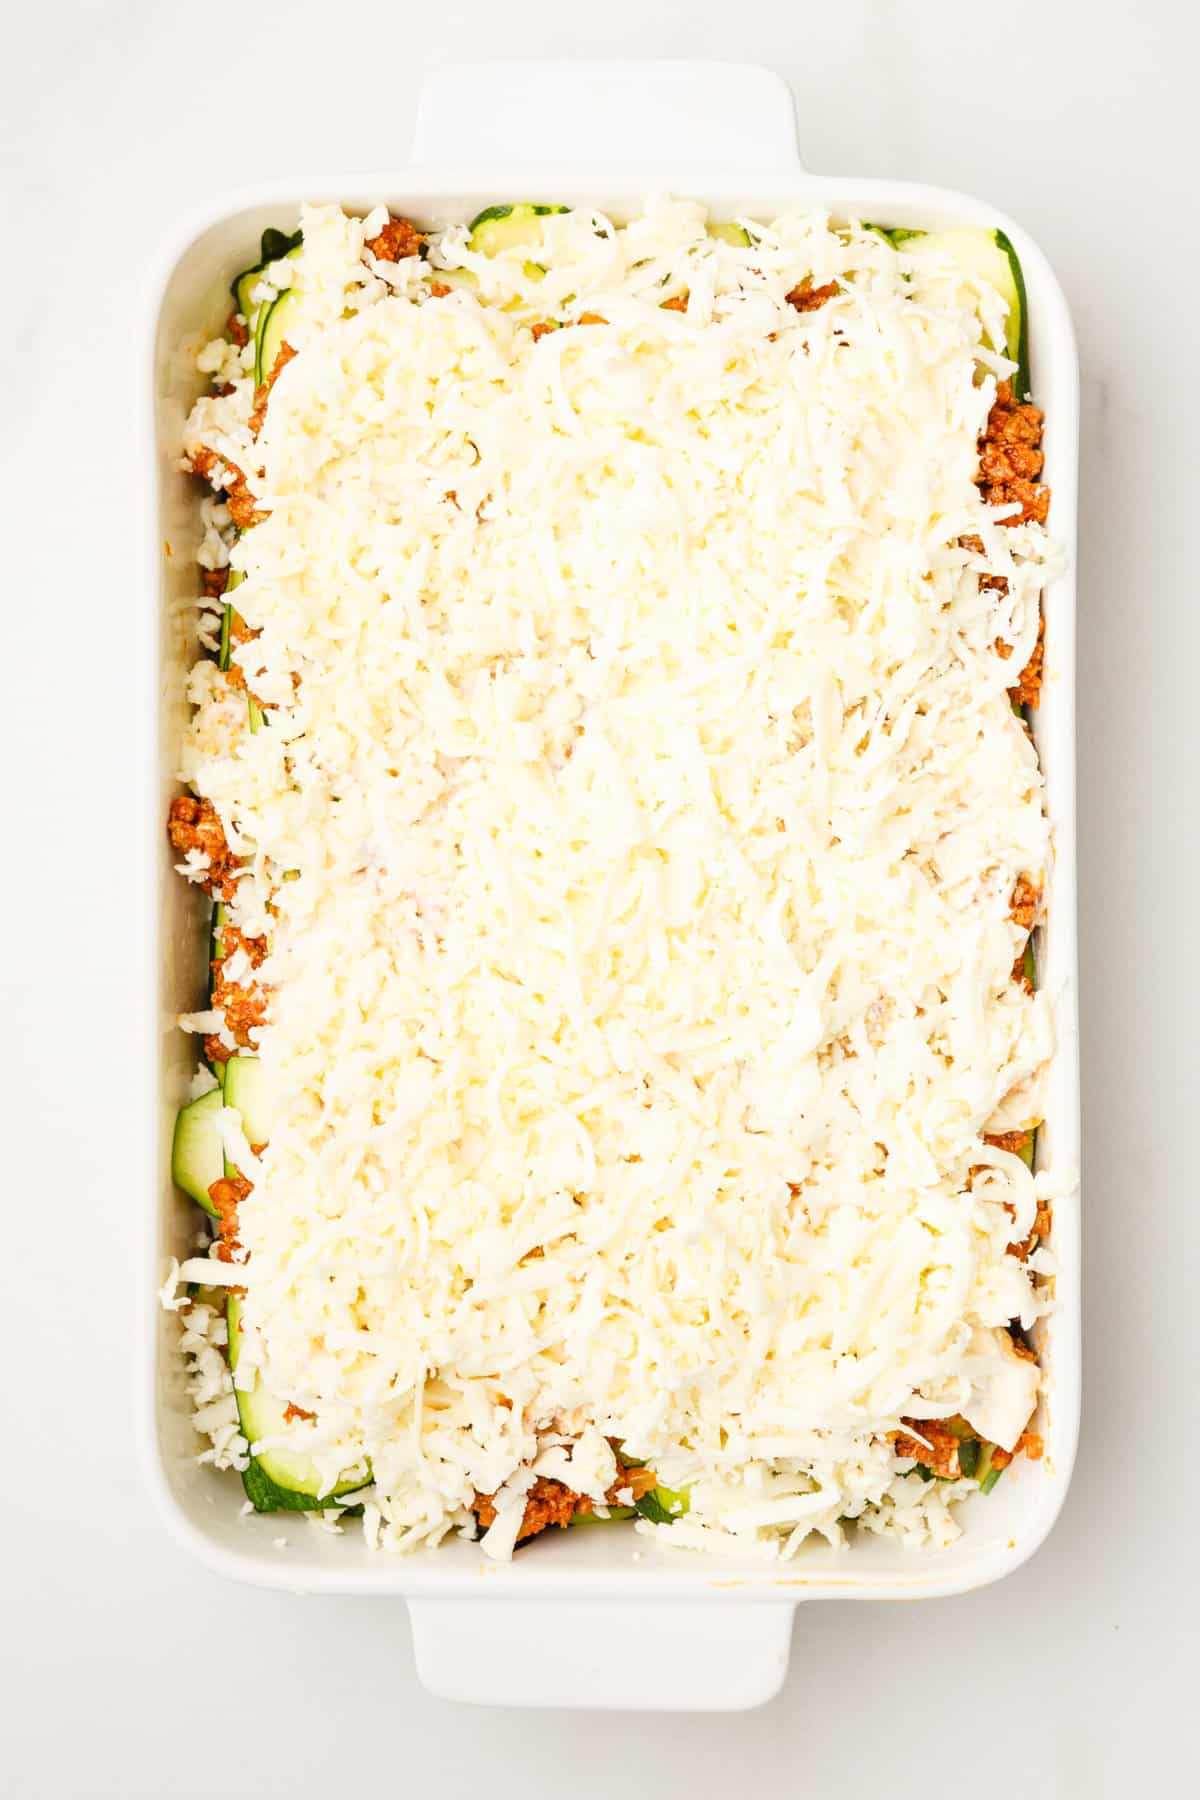 thinly sliced zucchini layered at the bottom of a 9x13 casserole dish topped with hearty tomato based ground beef and ricotta cheese and shredded mozzarella cheese